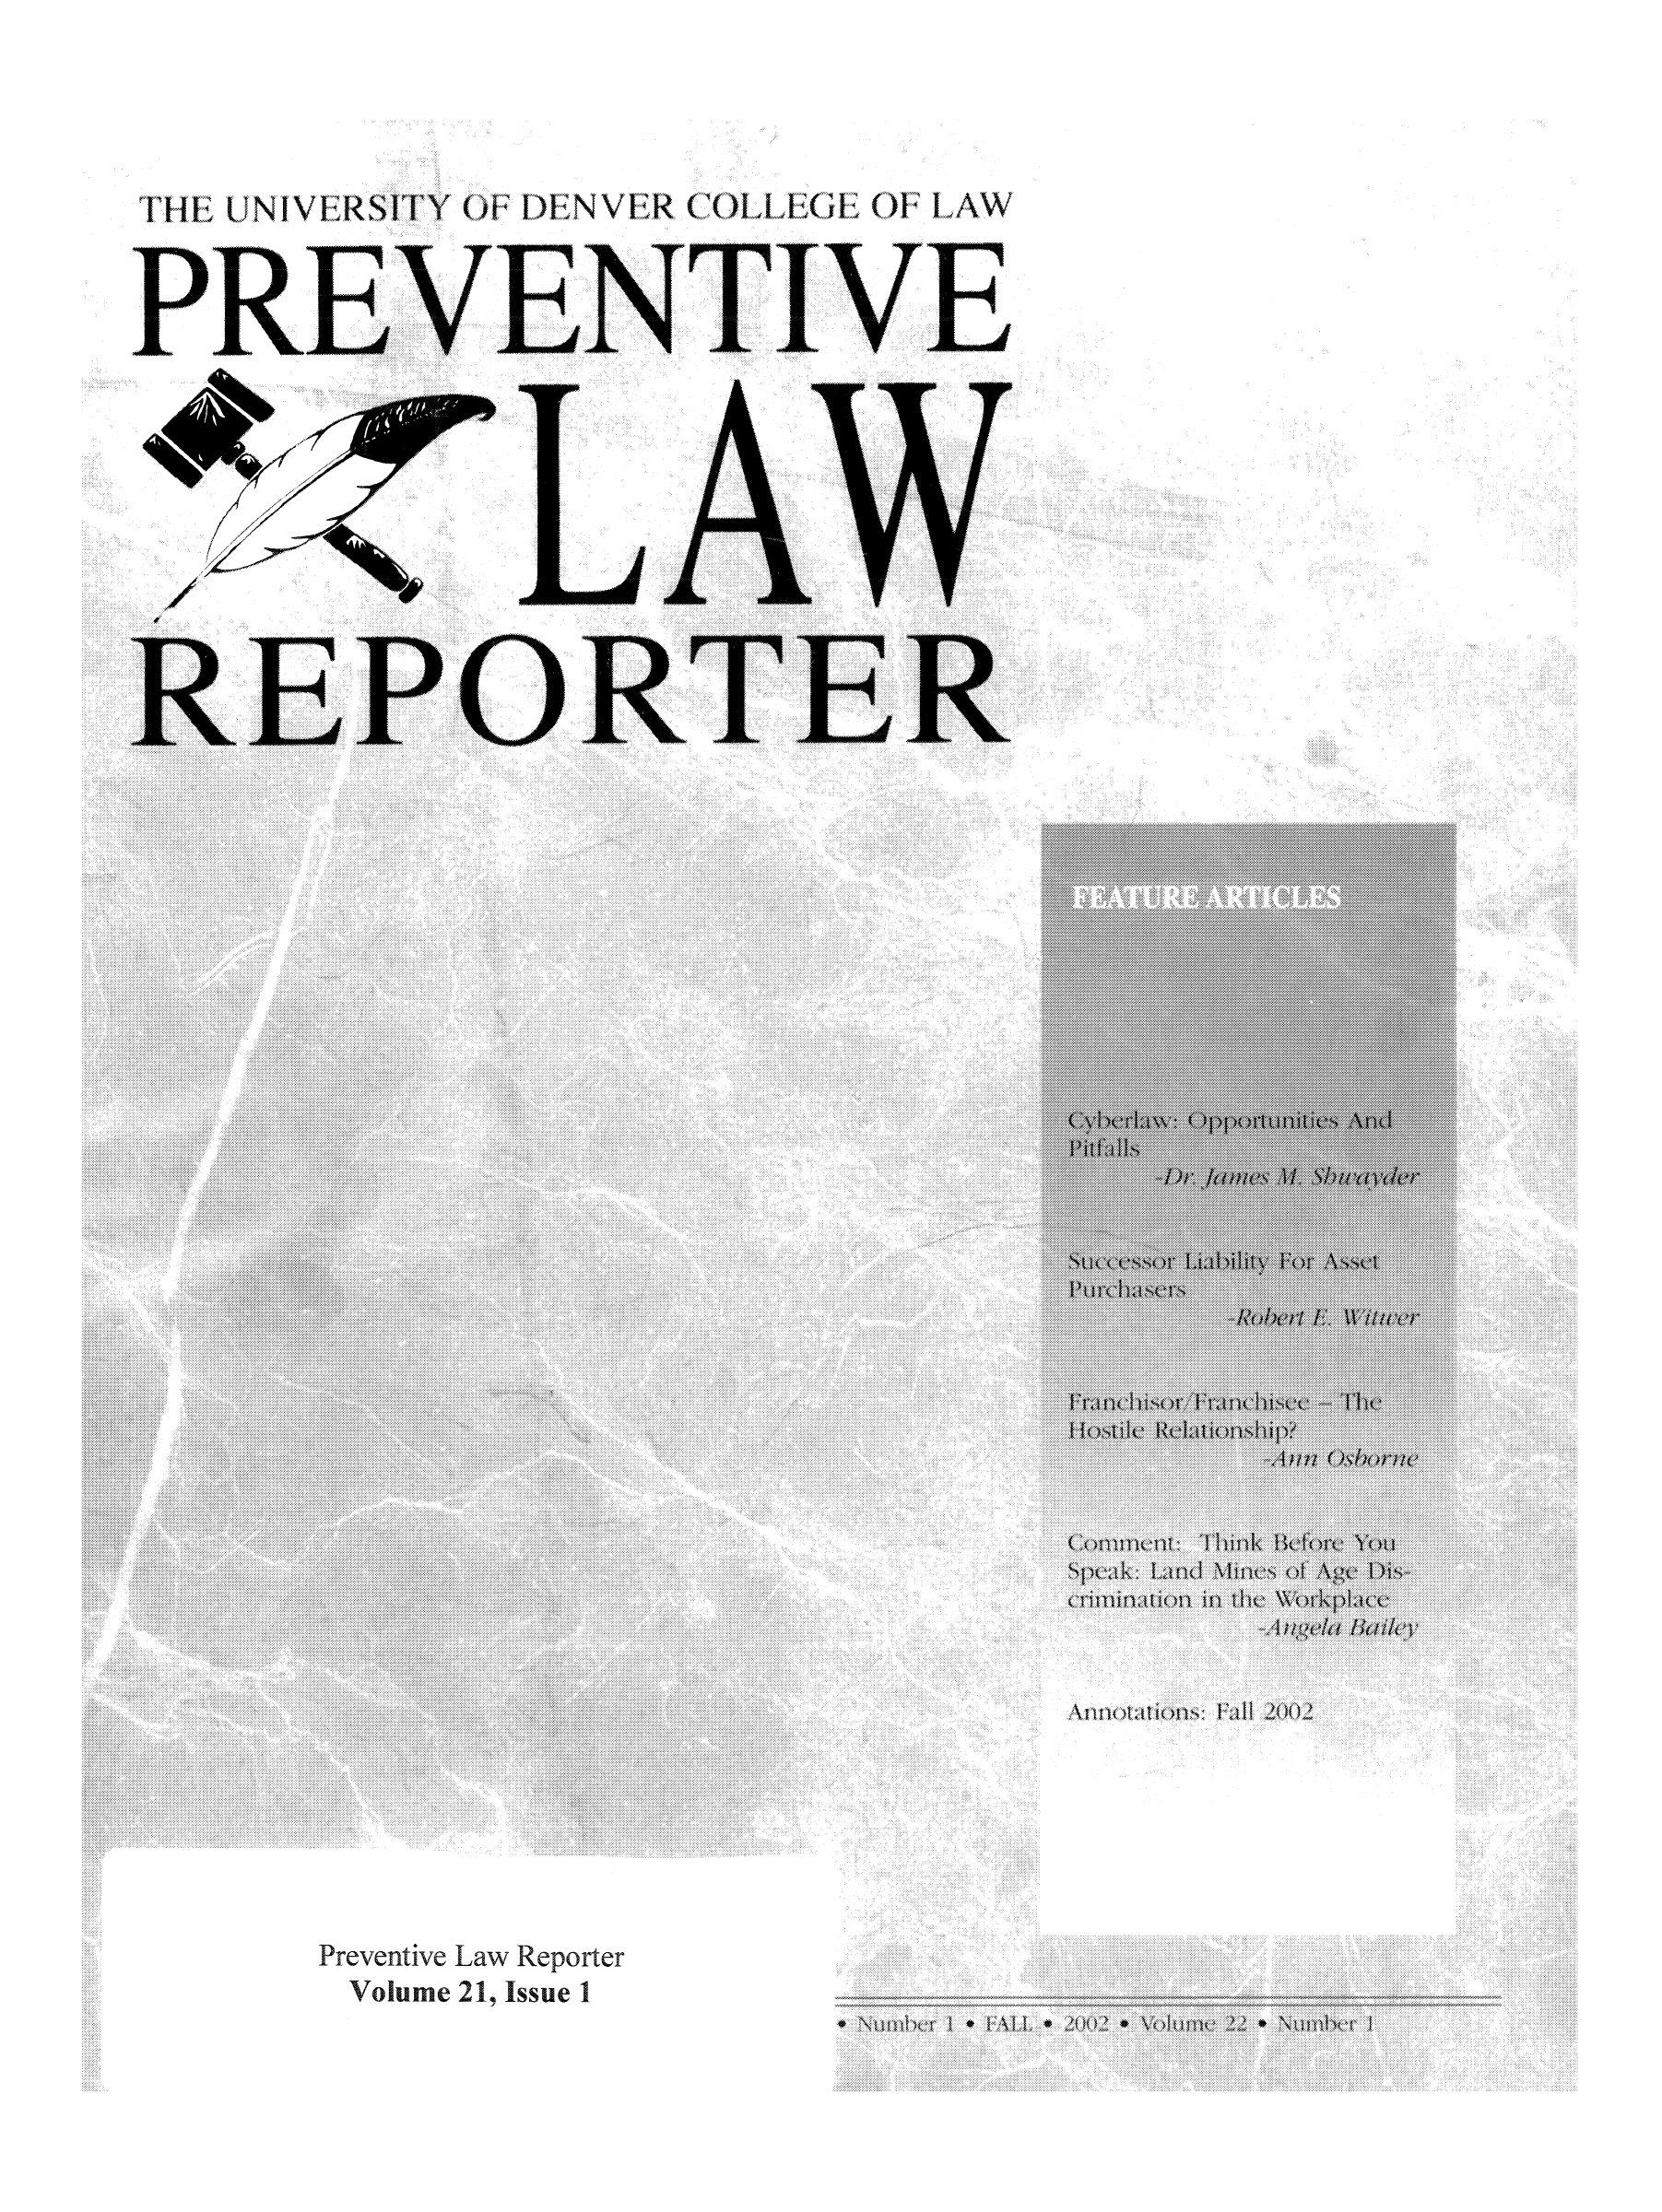 handle is hein.journals/prevlr21 and id is 1 raw text is: THE UNIVERSITY OF DENVER (OILLEGE OF LAW
PREVENTIVE
-tittrNIVA --TYT-

A

H (>Z

Preventive Law Reporter
Volume 21, Issue 1


